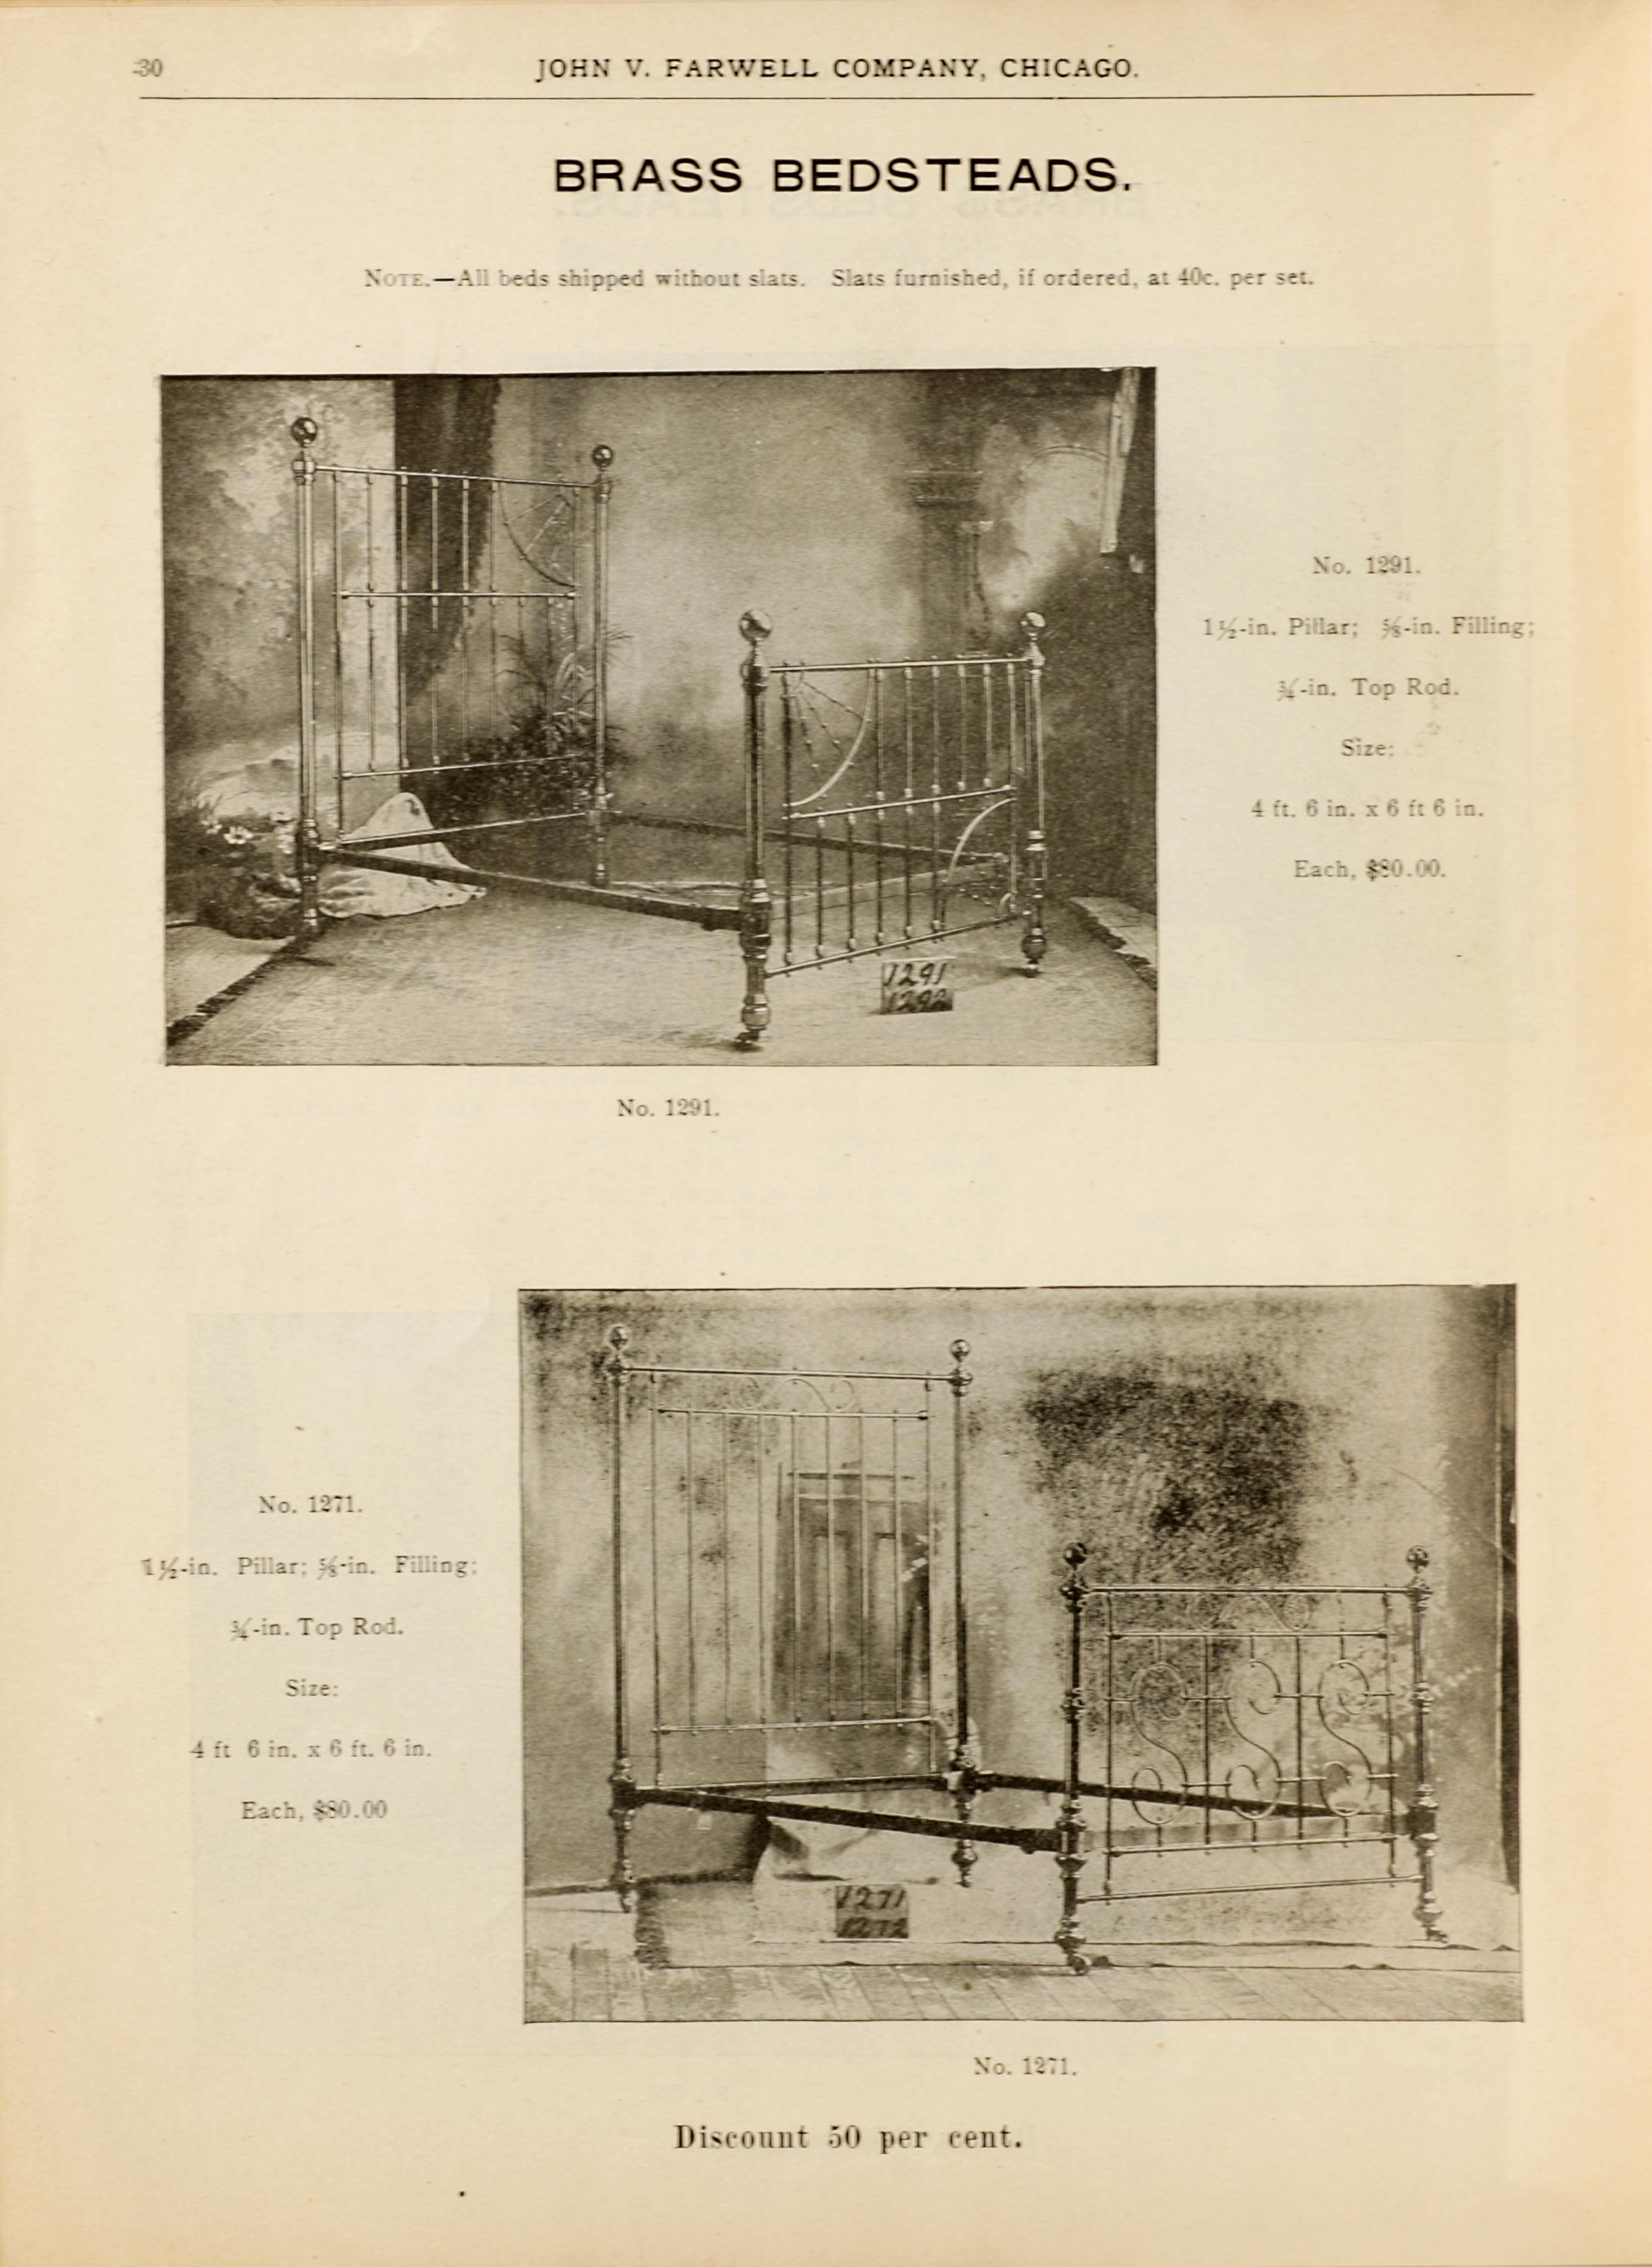 John V. Farwell Iron Bed Catalog, Chicago 1895- Page 22